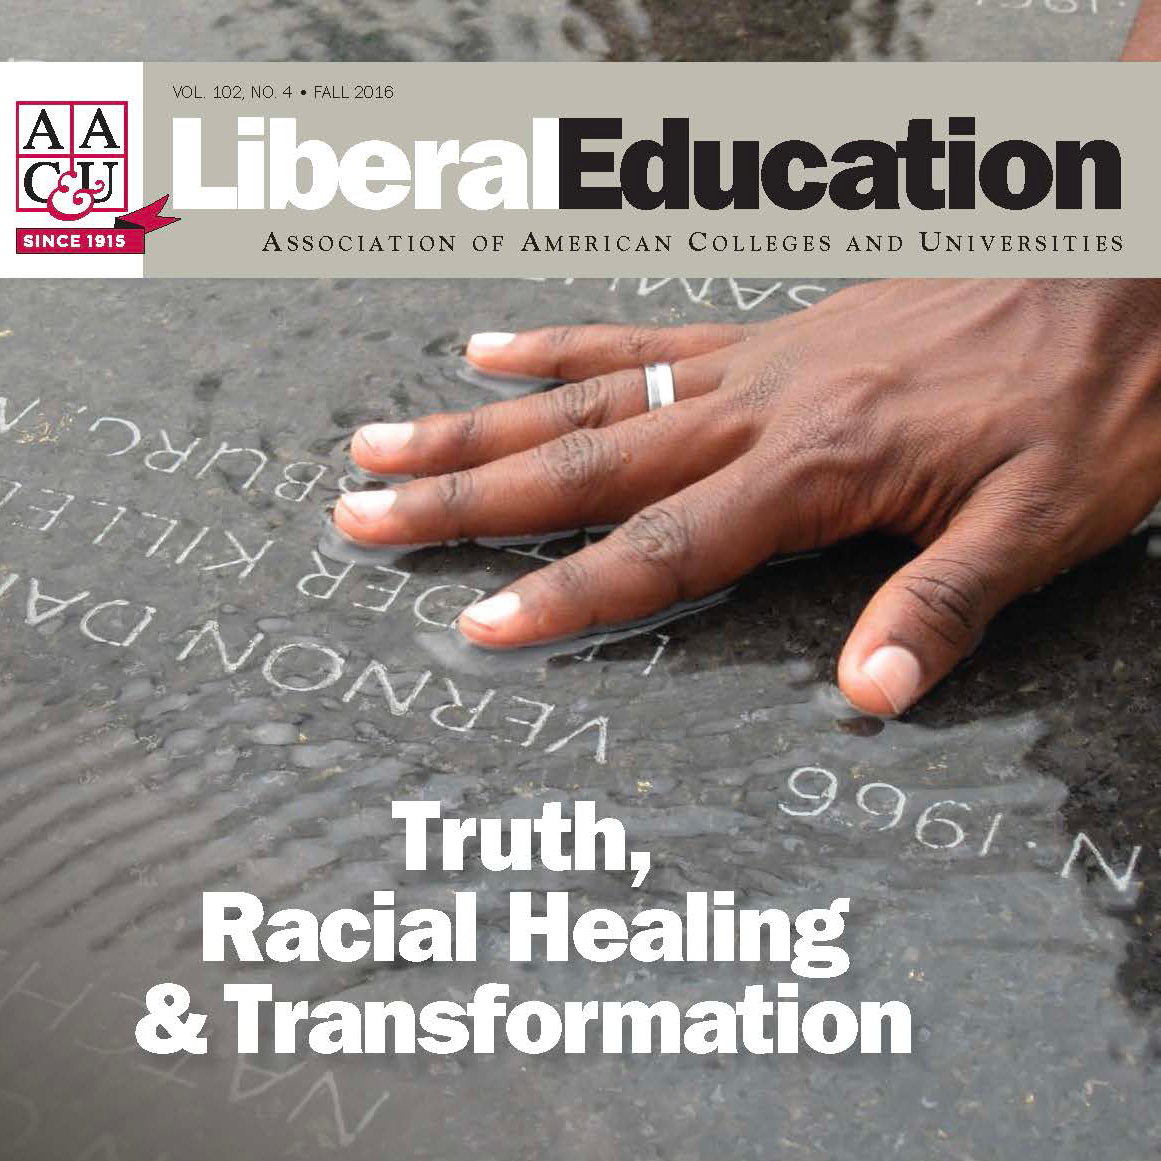 The cover of the Liberal Education magazine issue "Truth, Racial Healing and Transformation," showing a hand resting on a memorial.